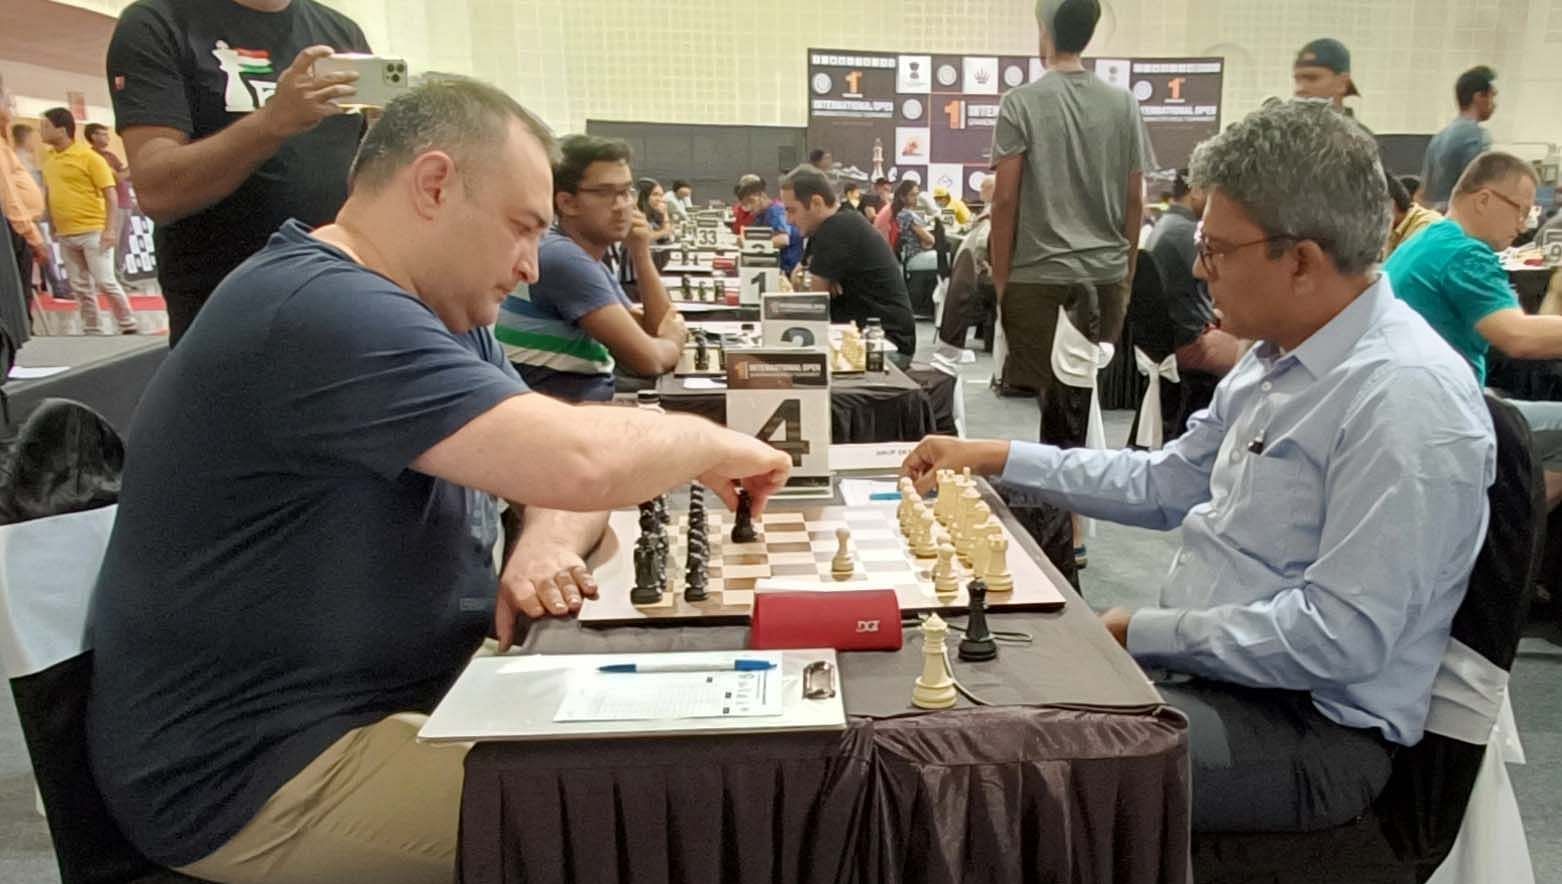 International Master Anup Deshmukh (R) of Nagpur drew with top seed GM Farrukh Amonatov of Tajikistan in the fourth round in Pune on Thursday (Picture credit: AICF)